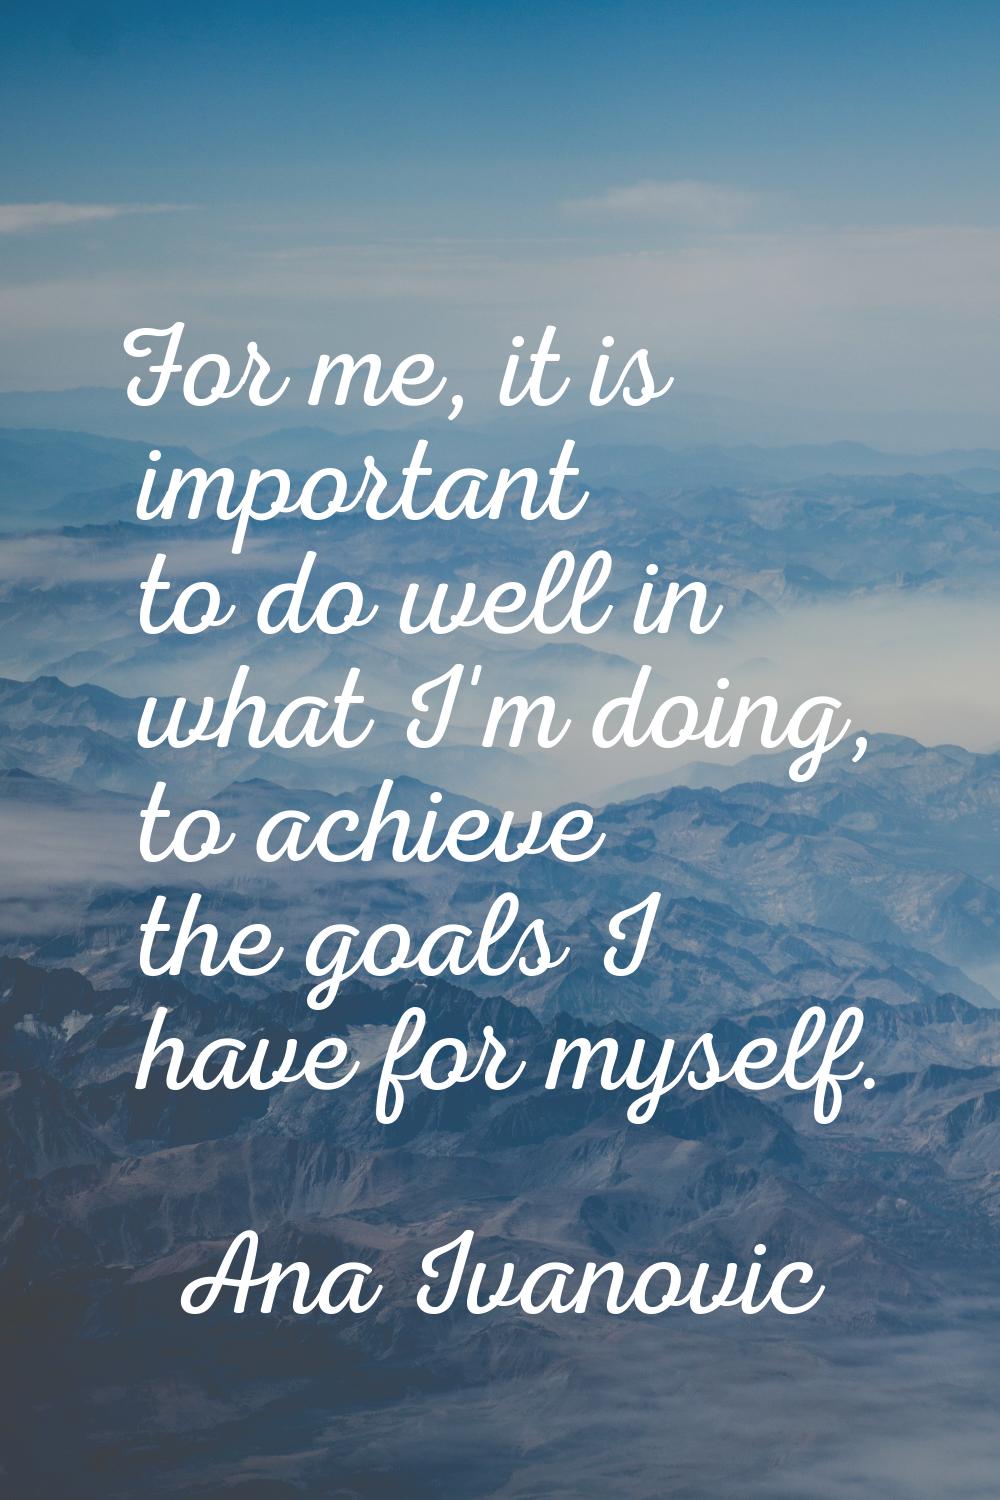 For me, it is important to do well in what I'm doing, to achieve the goals I have for myself.